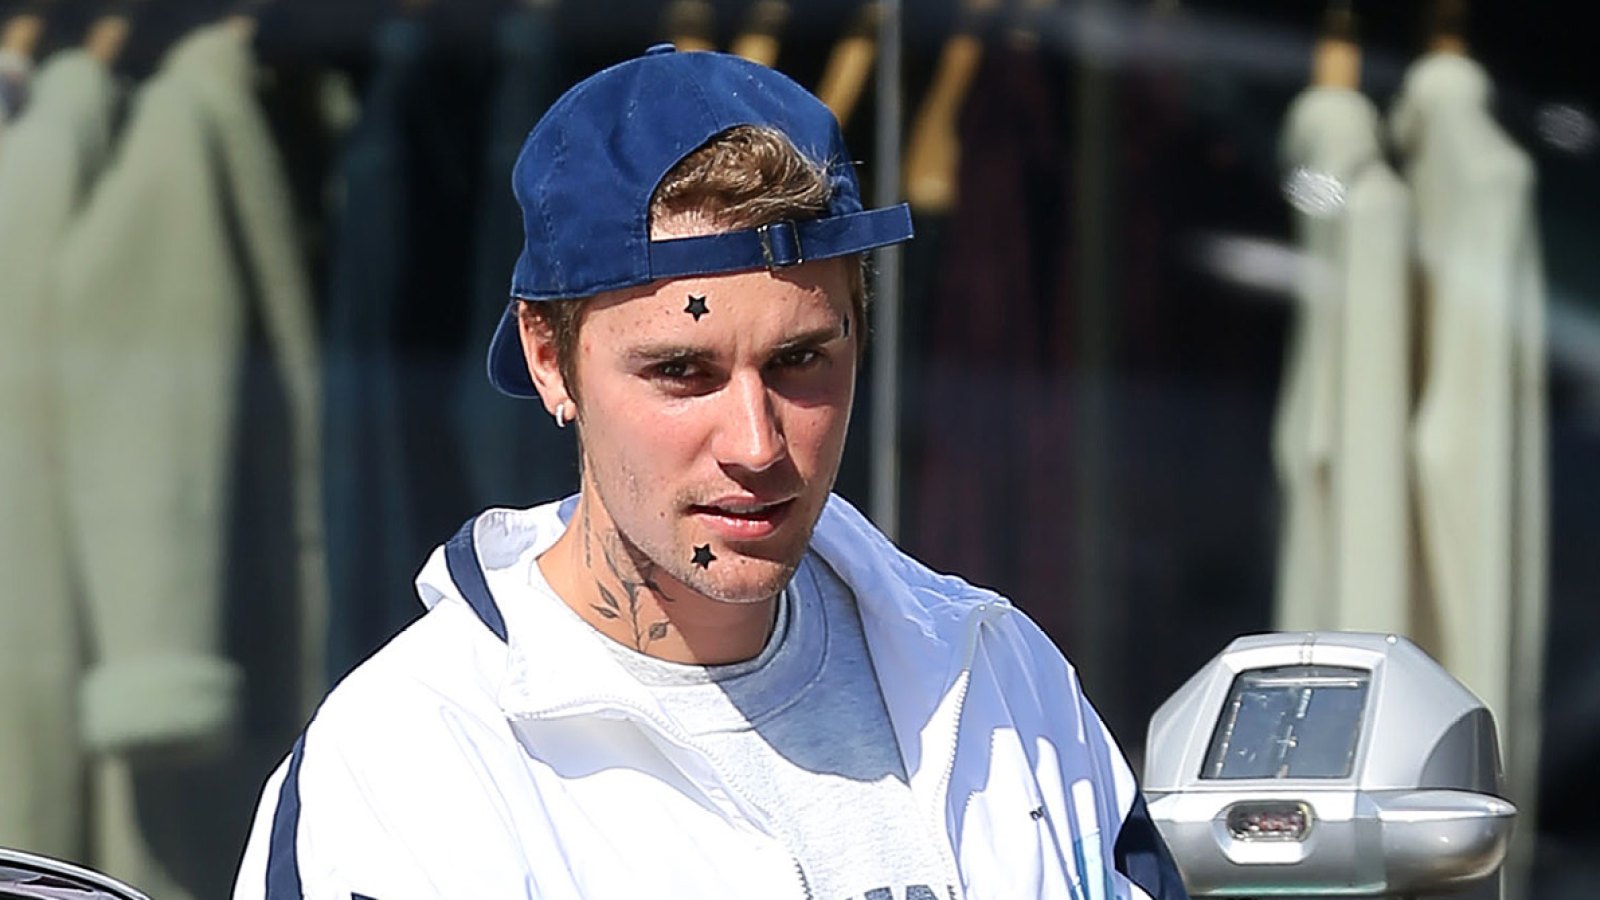 Justin Bieber’s Most Honest Quotes About His Mental Health Struggles 187 Justin Bieber Meets Up With Some Friends In West Hollywood